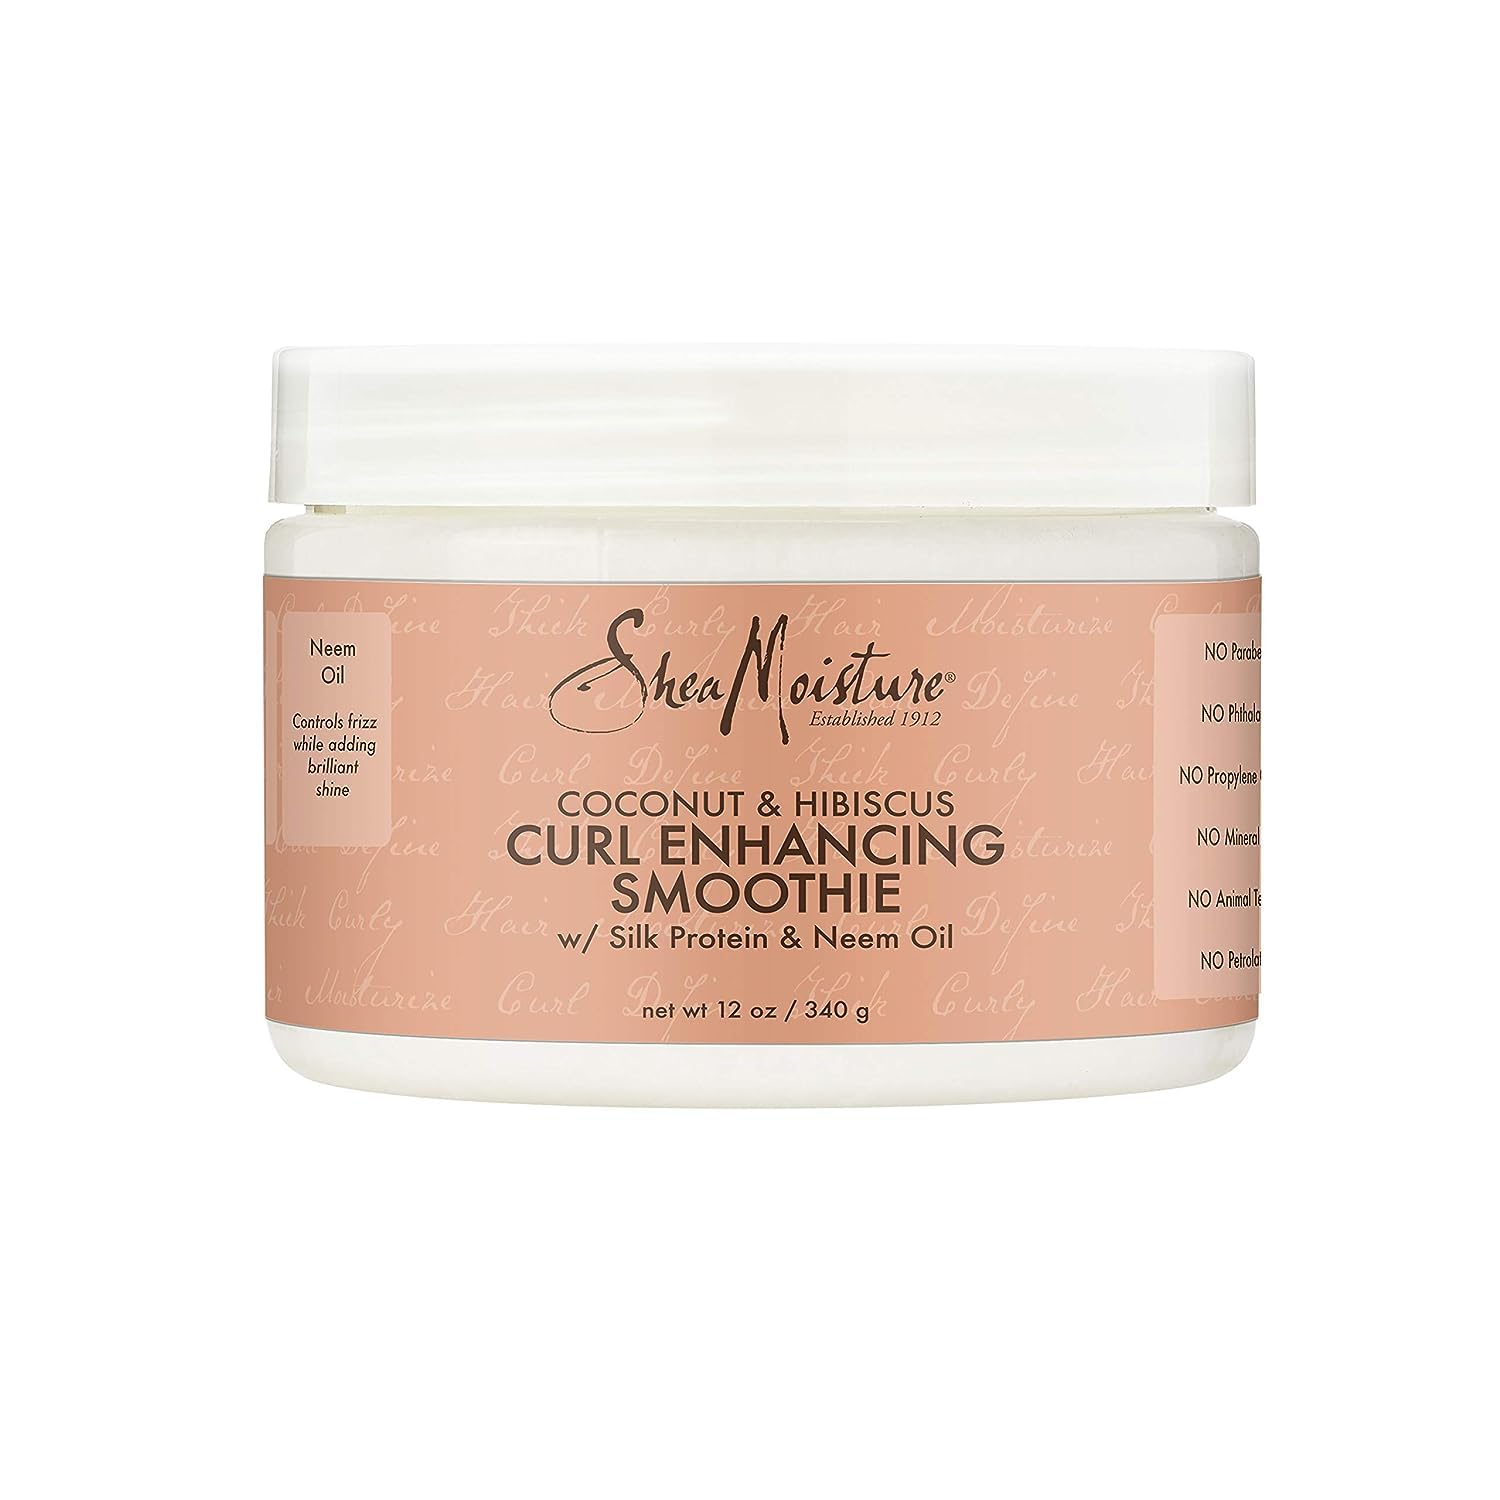 SheaMoisture Smoothie Curl Enhancing Cream Coconut and Hibiscus for Thick, Curly Hair Sulfate Free and Paraben Free 12 oz